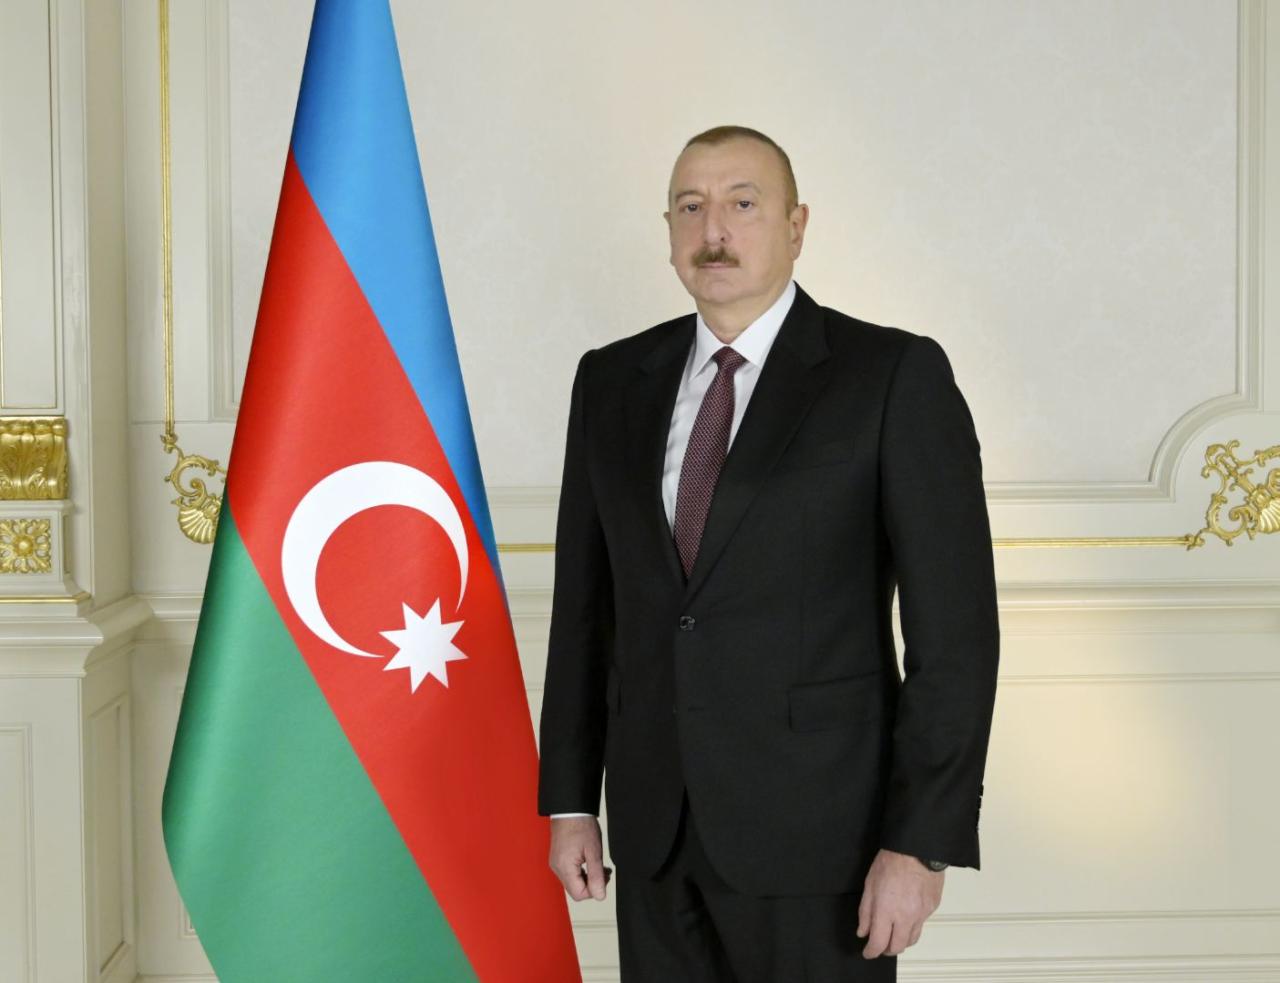 Аzerbaijani President Ilham Aliyev’s impeccable, well-considered policy predetermined liberation of Karabakh from Armenian occupation